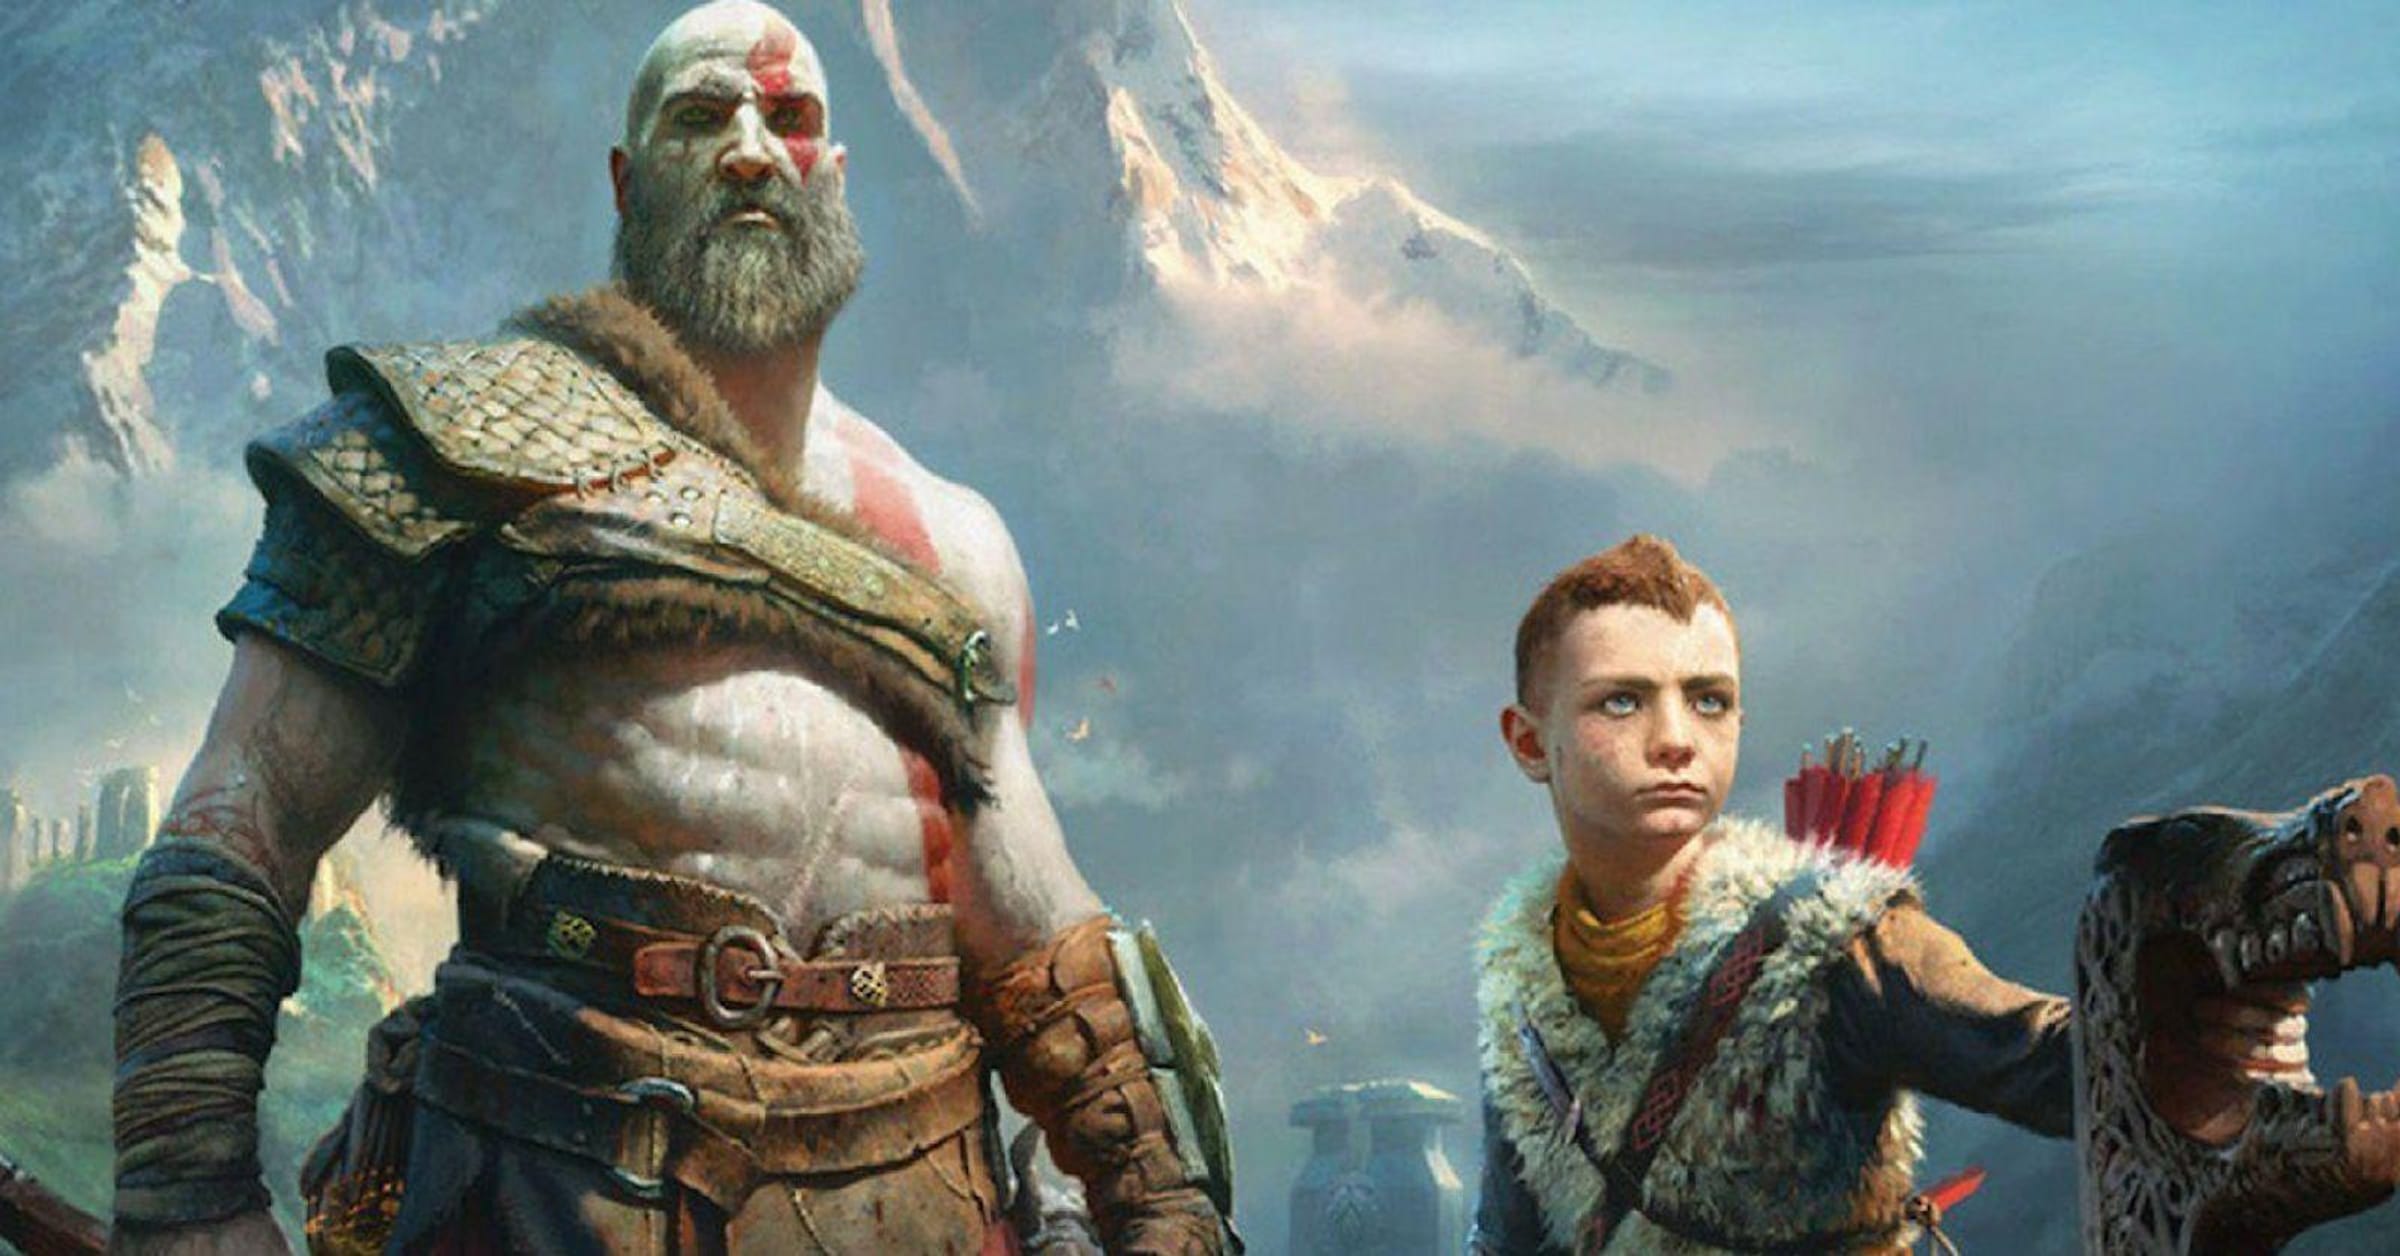 Young kratos would have fought it : r/GodofWar